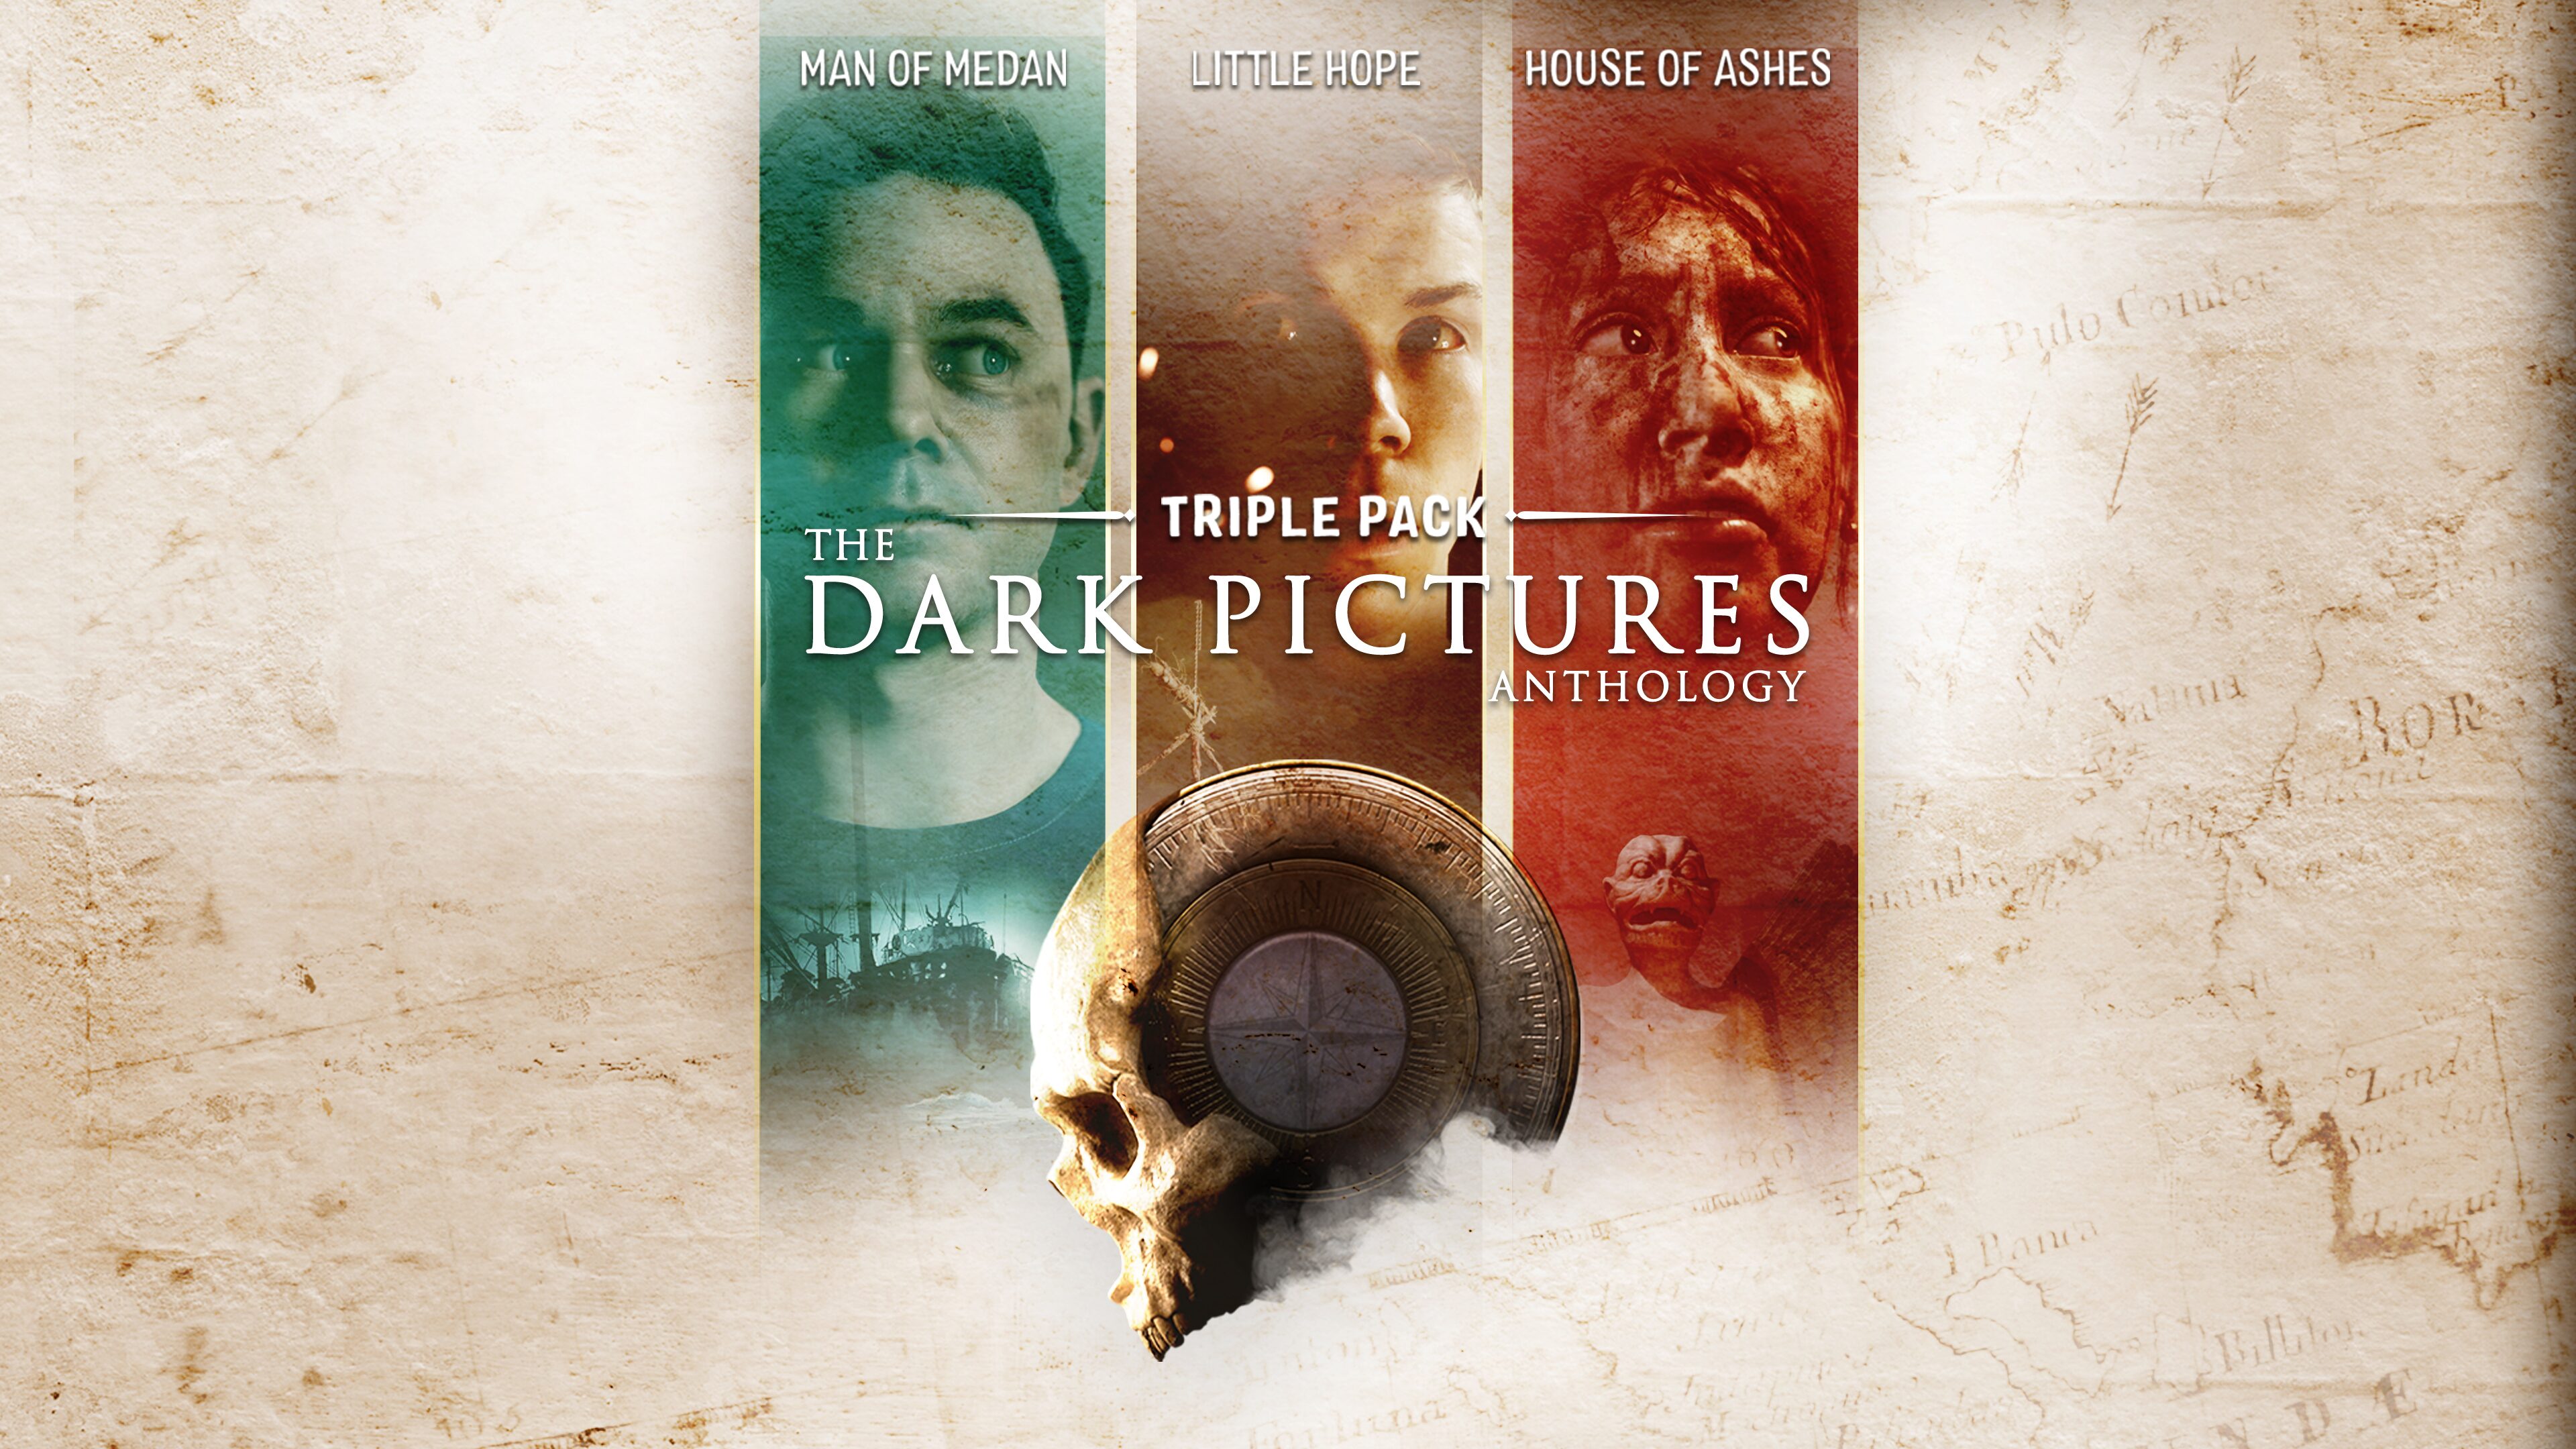 The dark pictures все игры. Dark pictures: House of Ashes (ps4, русская версия). Игра the Dark pictures Anthology: House of Ashes. The Dark pictures. Triple Pack. The Dark pictures Anthology - Triple Pack.